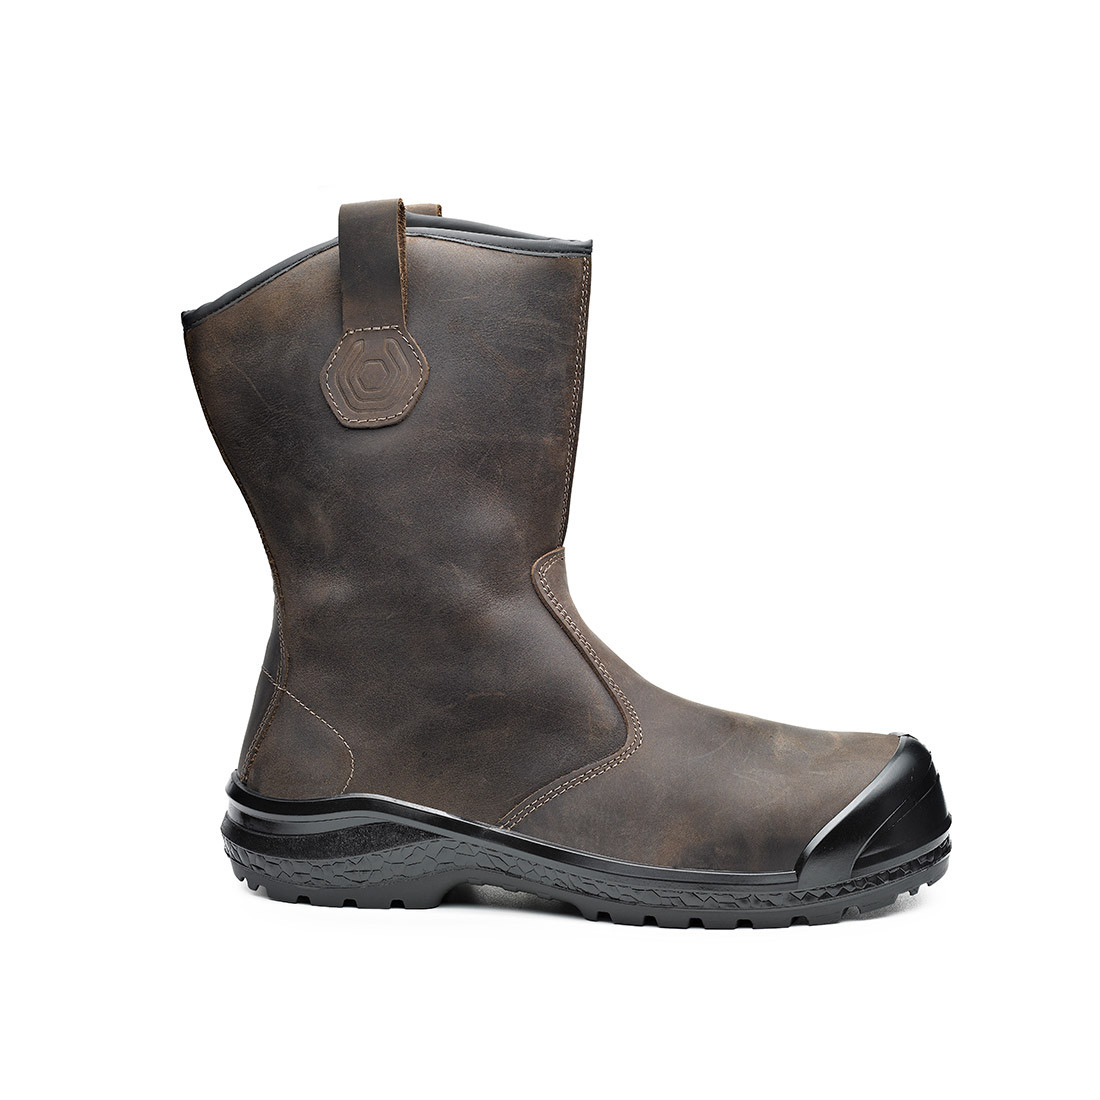 Be-Extreme Boot S3 CI SRC - Footwear